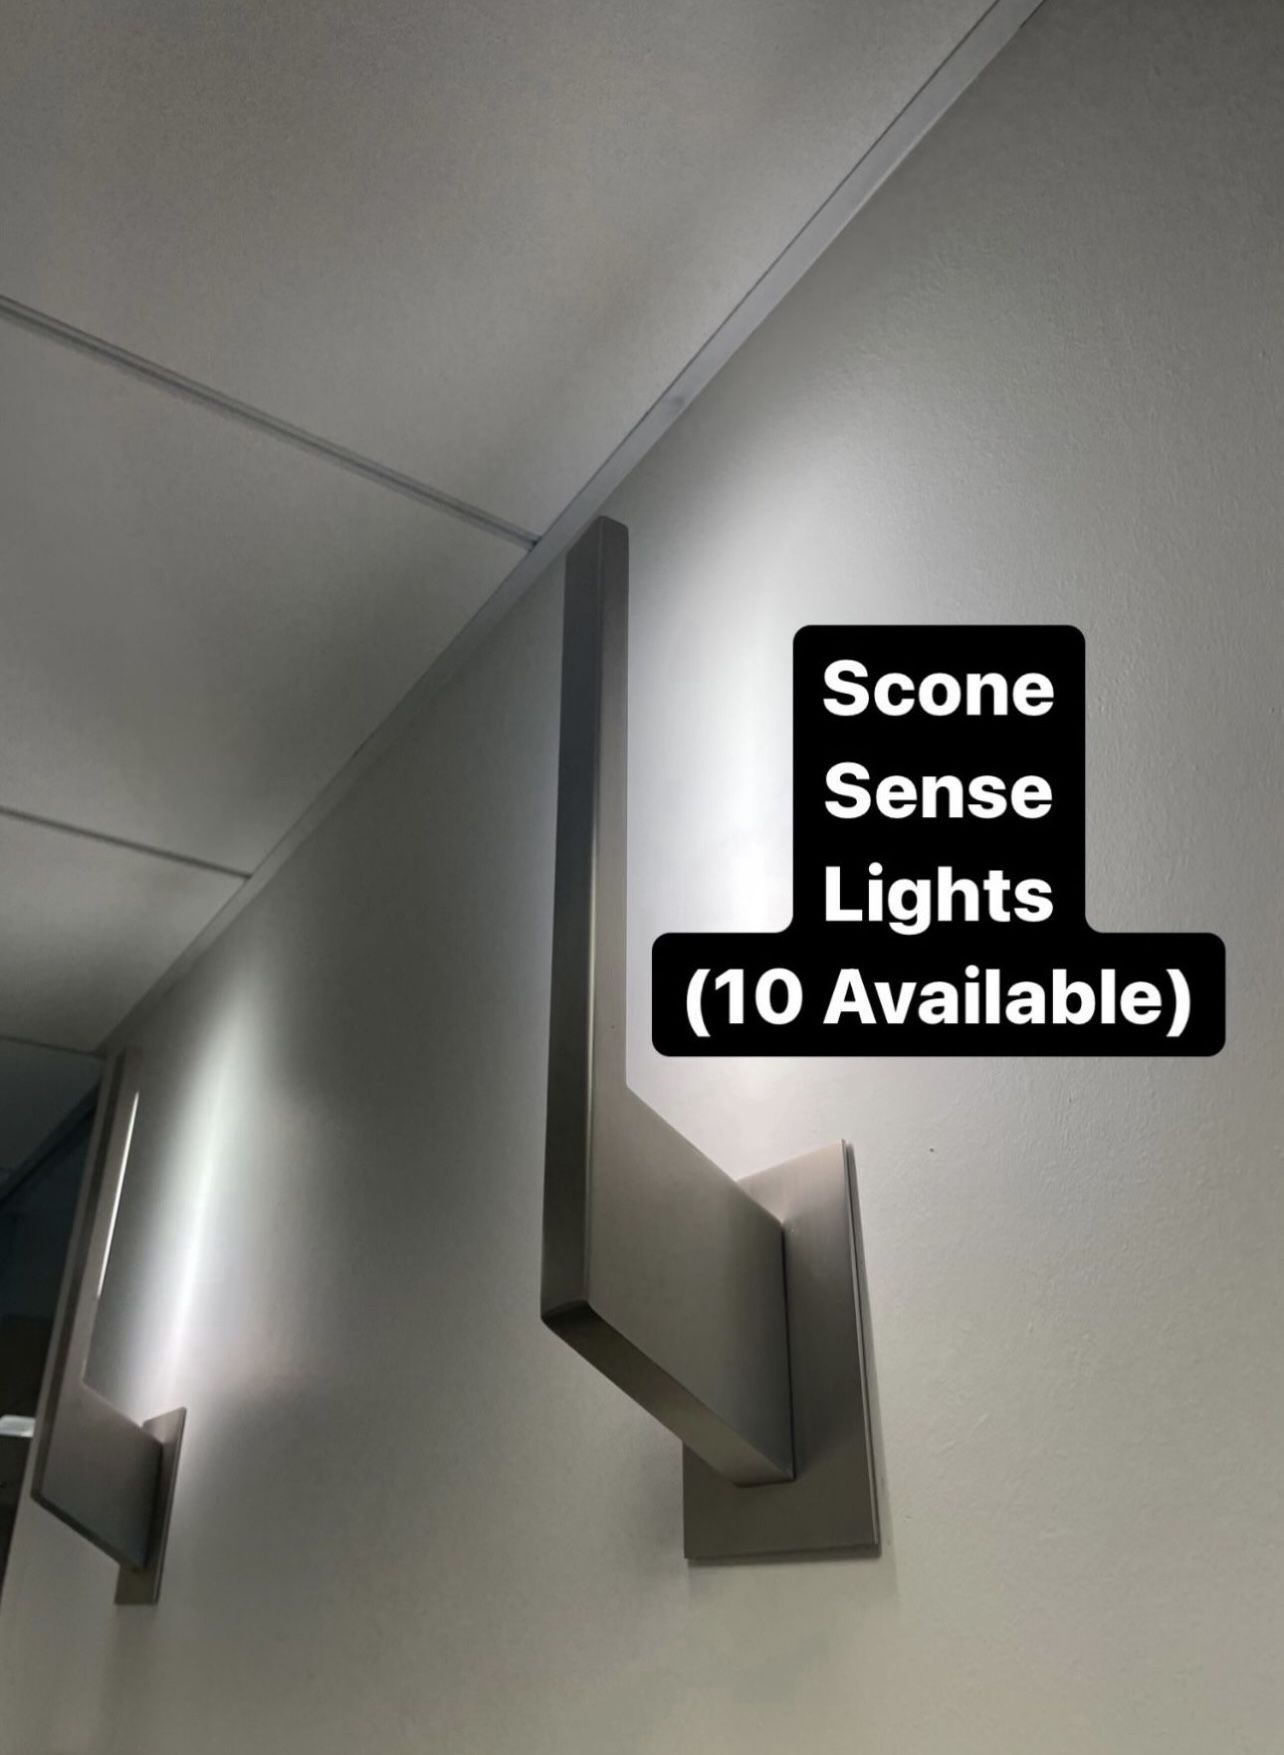 High Quality Indoor Scone Sense Wall Lights (10 Available) PickUp Today Available 